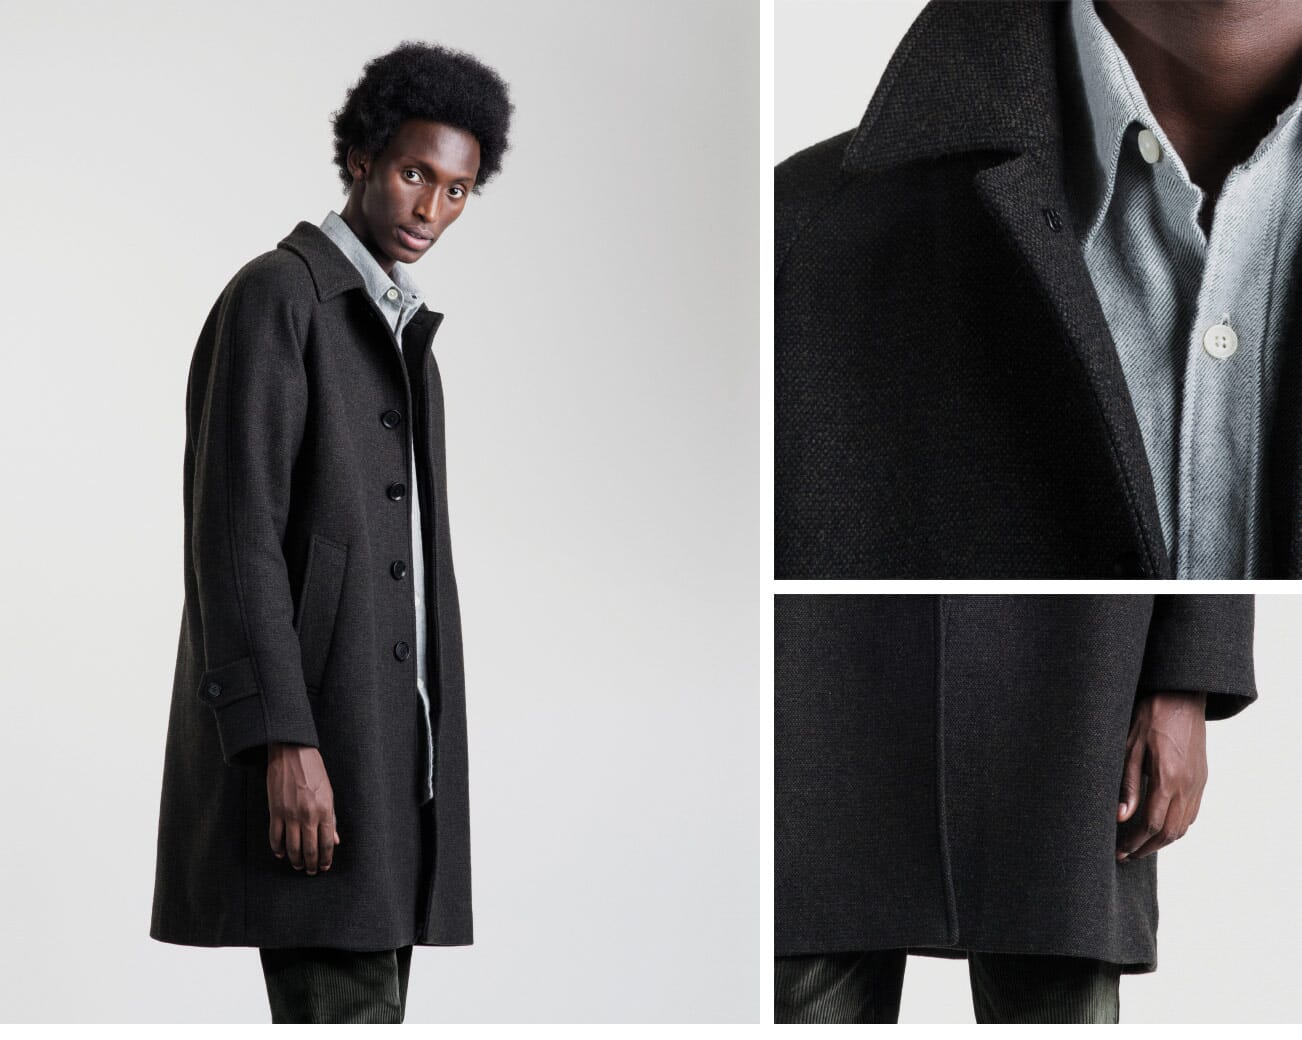 5 Of The Best Coats For Winter 2019 | OPUMO Magazine